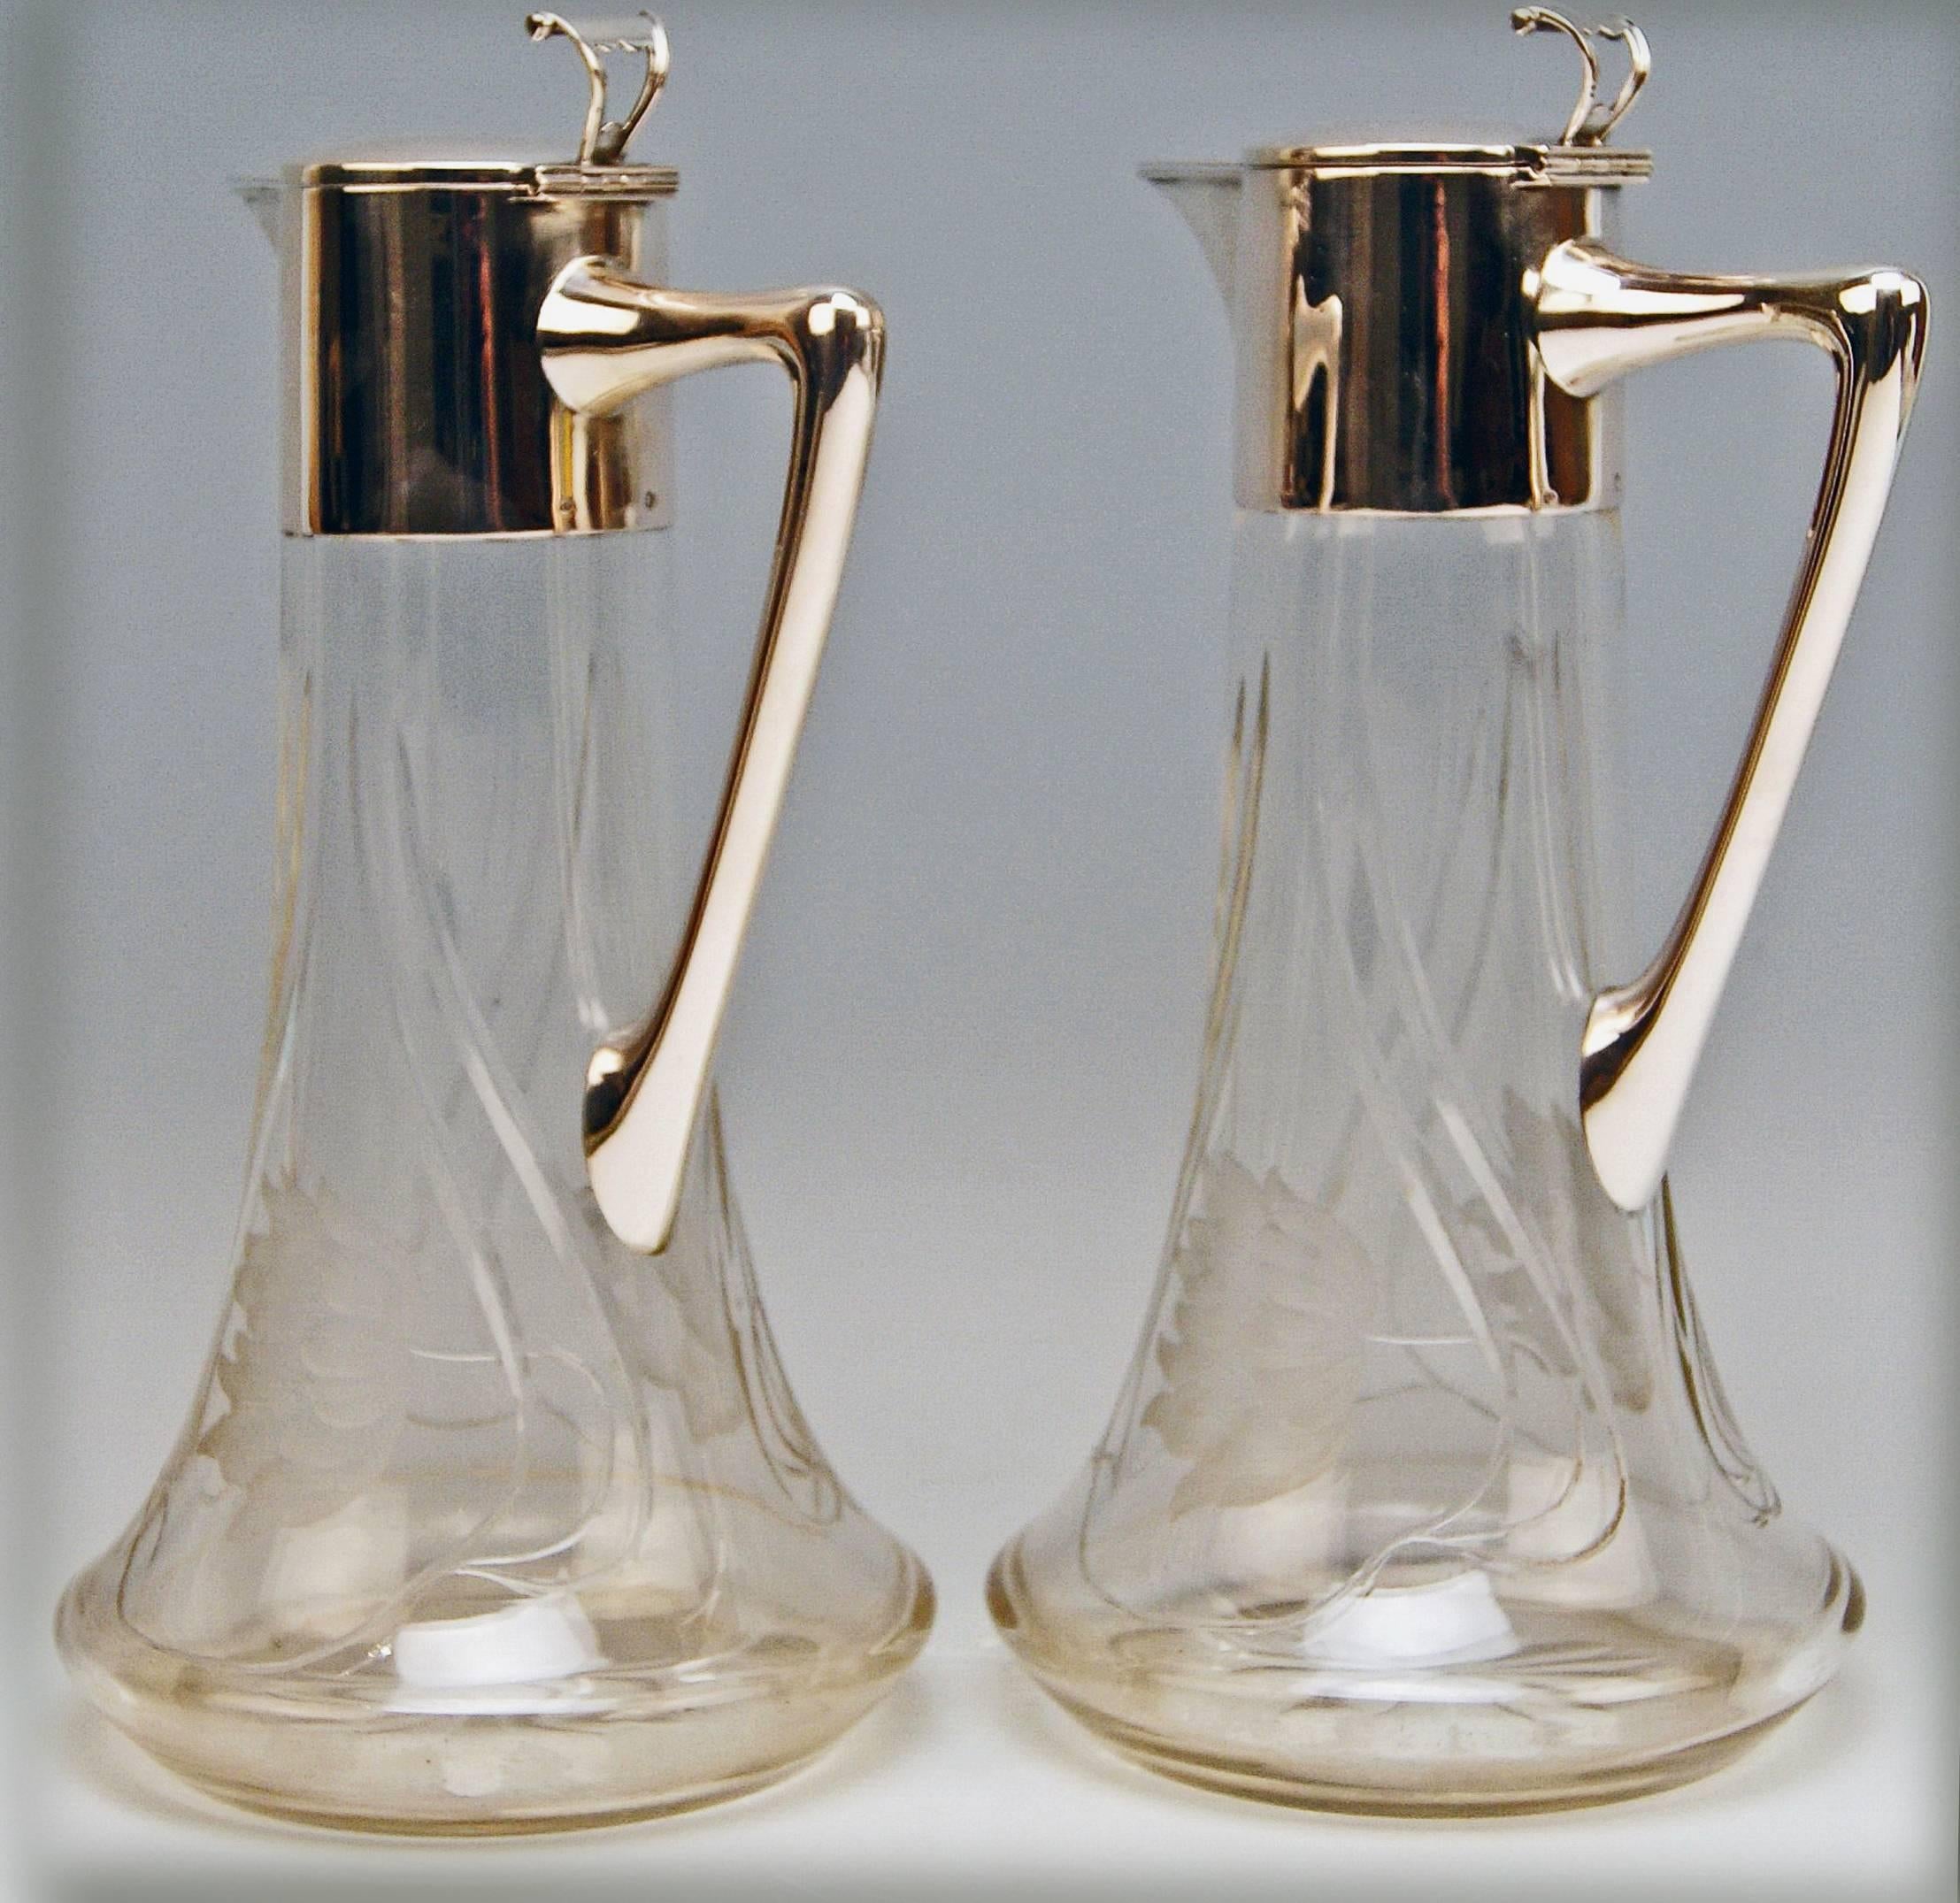 Excellent Pair of  Art Nouveau Glass Decanters  / Jugs,  made circa 1900

Manufactory:
Alexander Birkl / Vienna  (= mark of manufactory impressed)
Bibliography:
Waltraud Neuwirth,  Viennese Gold - and Silversmiths and Their Marks 1867 - 1922 ,